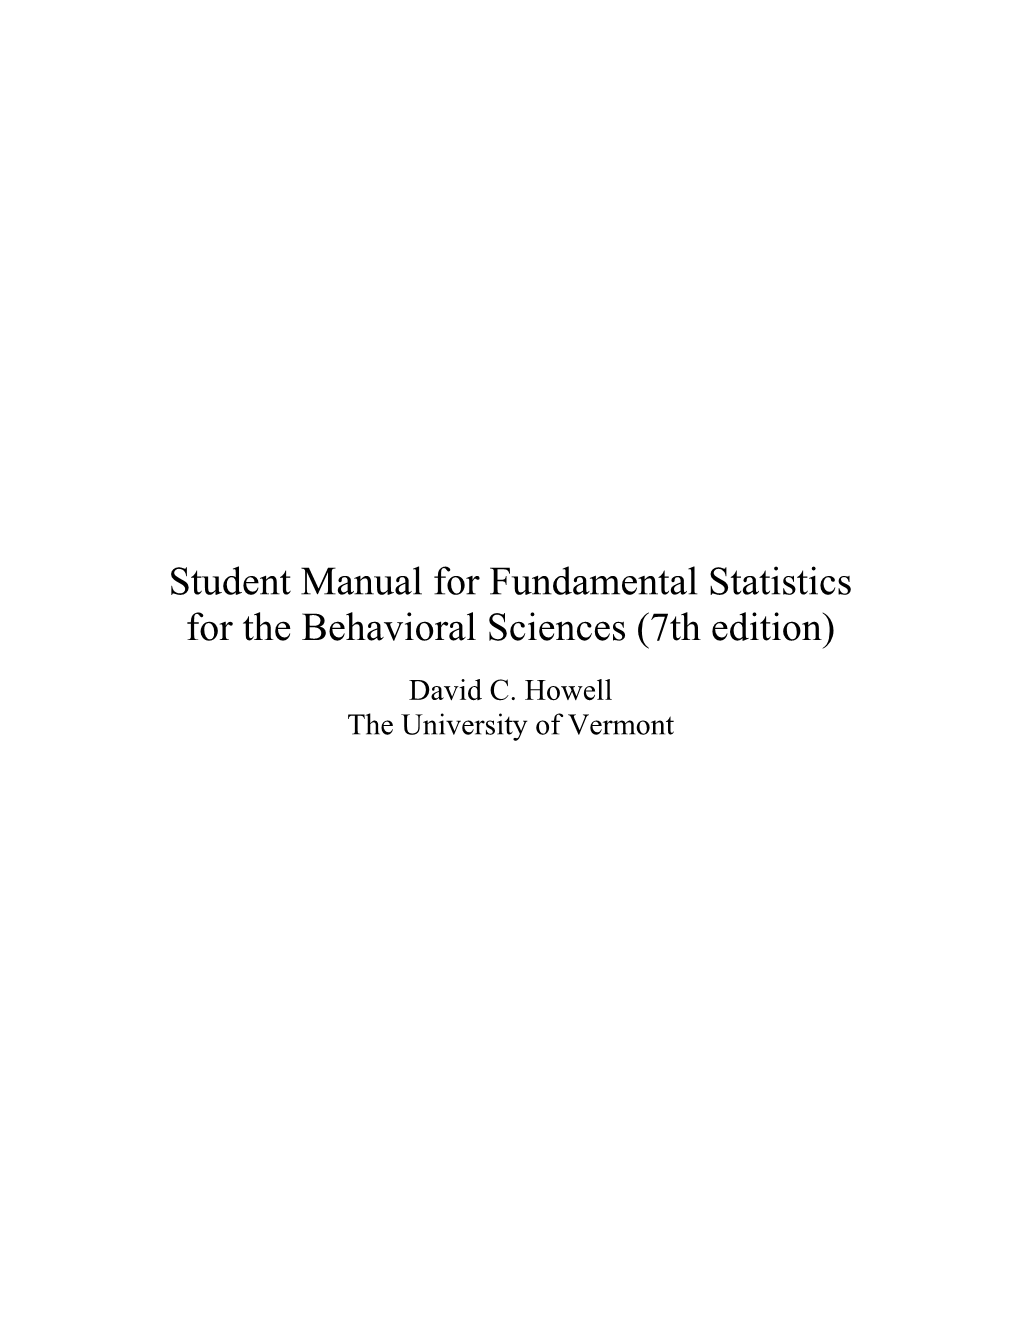 Solutions Manual for Fundamental Statistics for the Behavioral Sciences (5Th Edition)